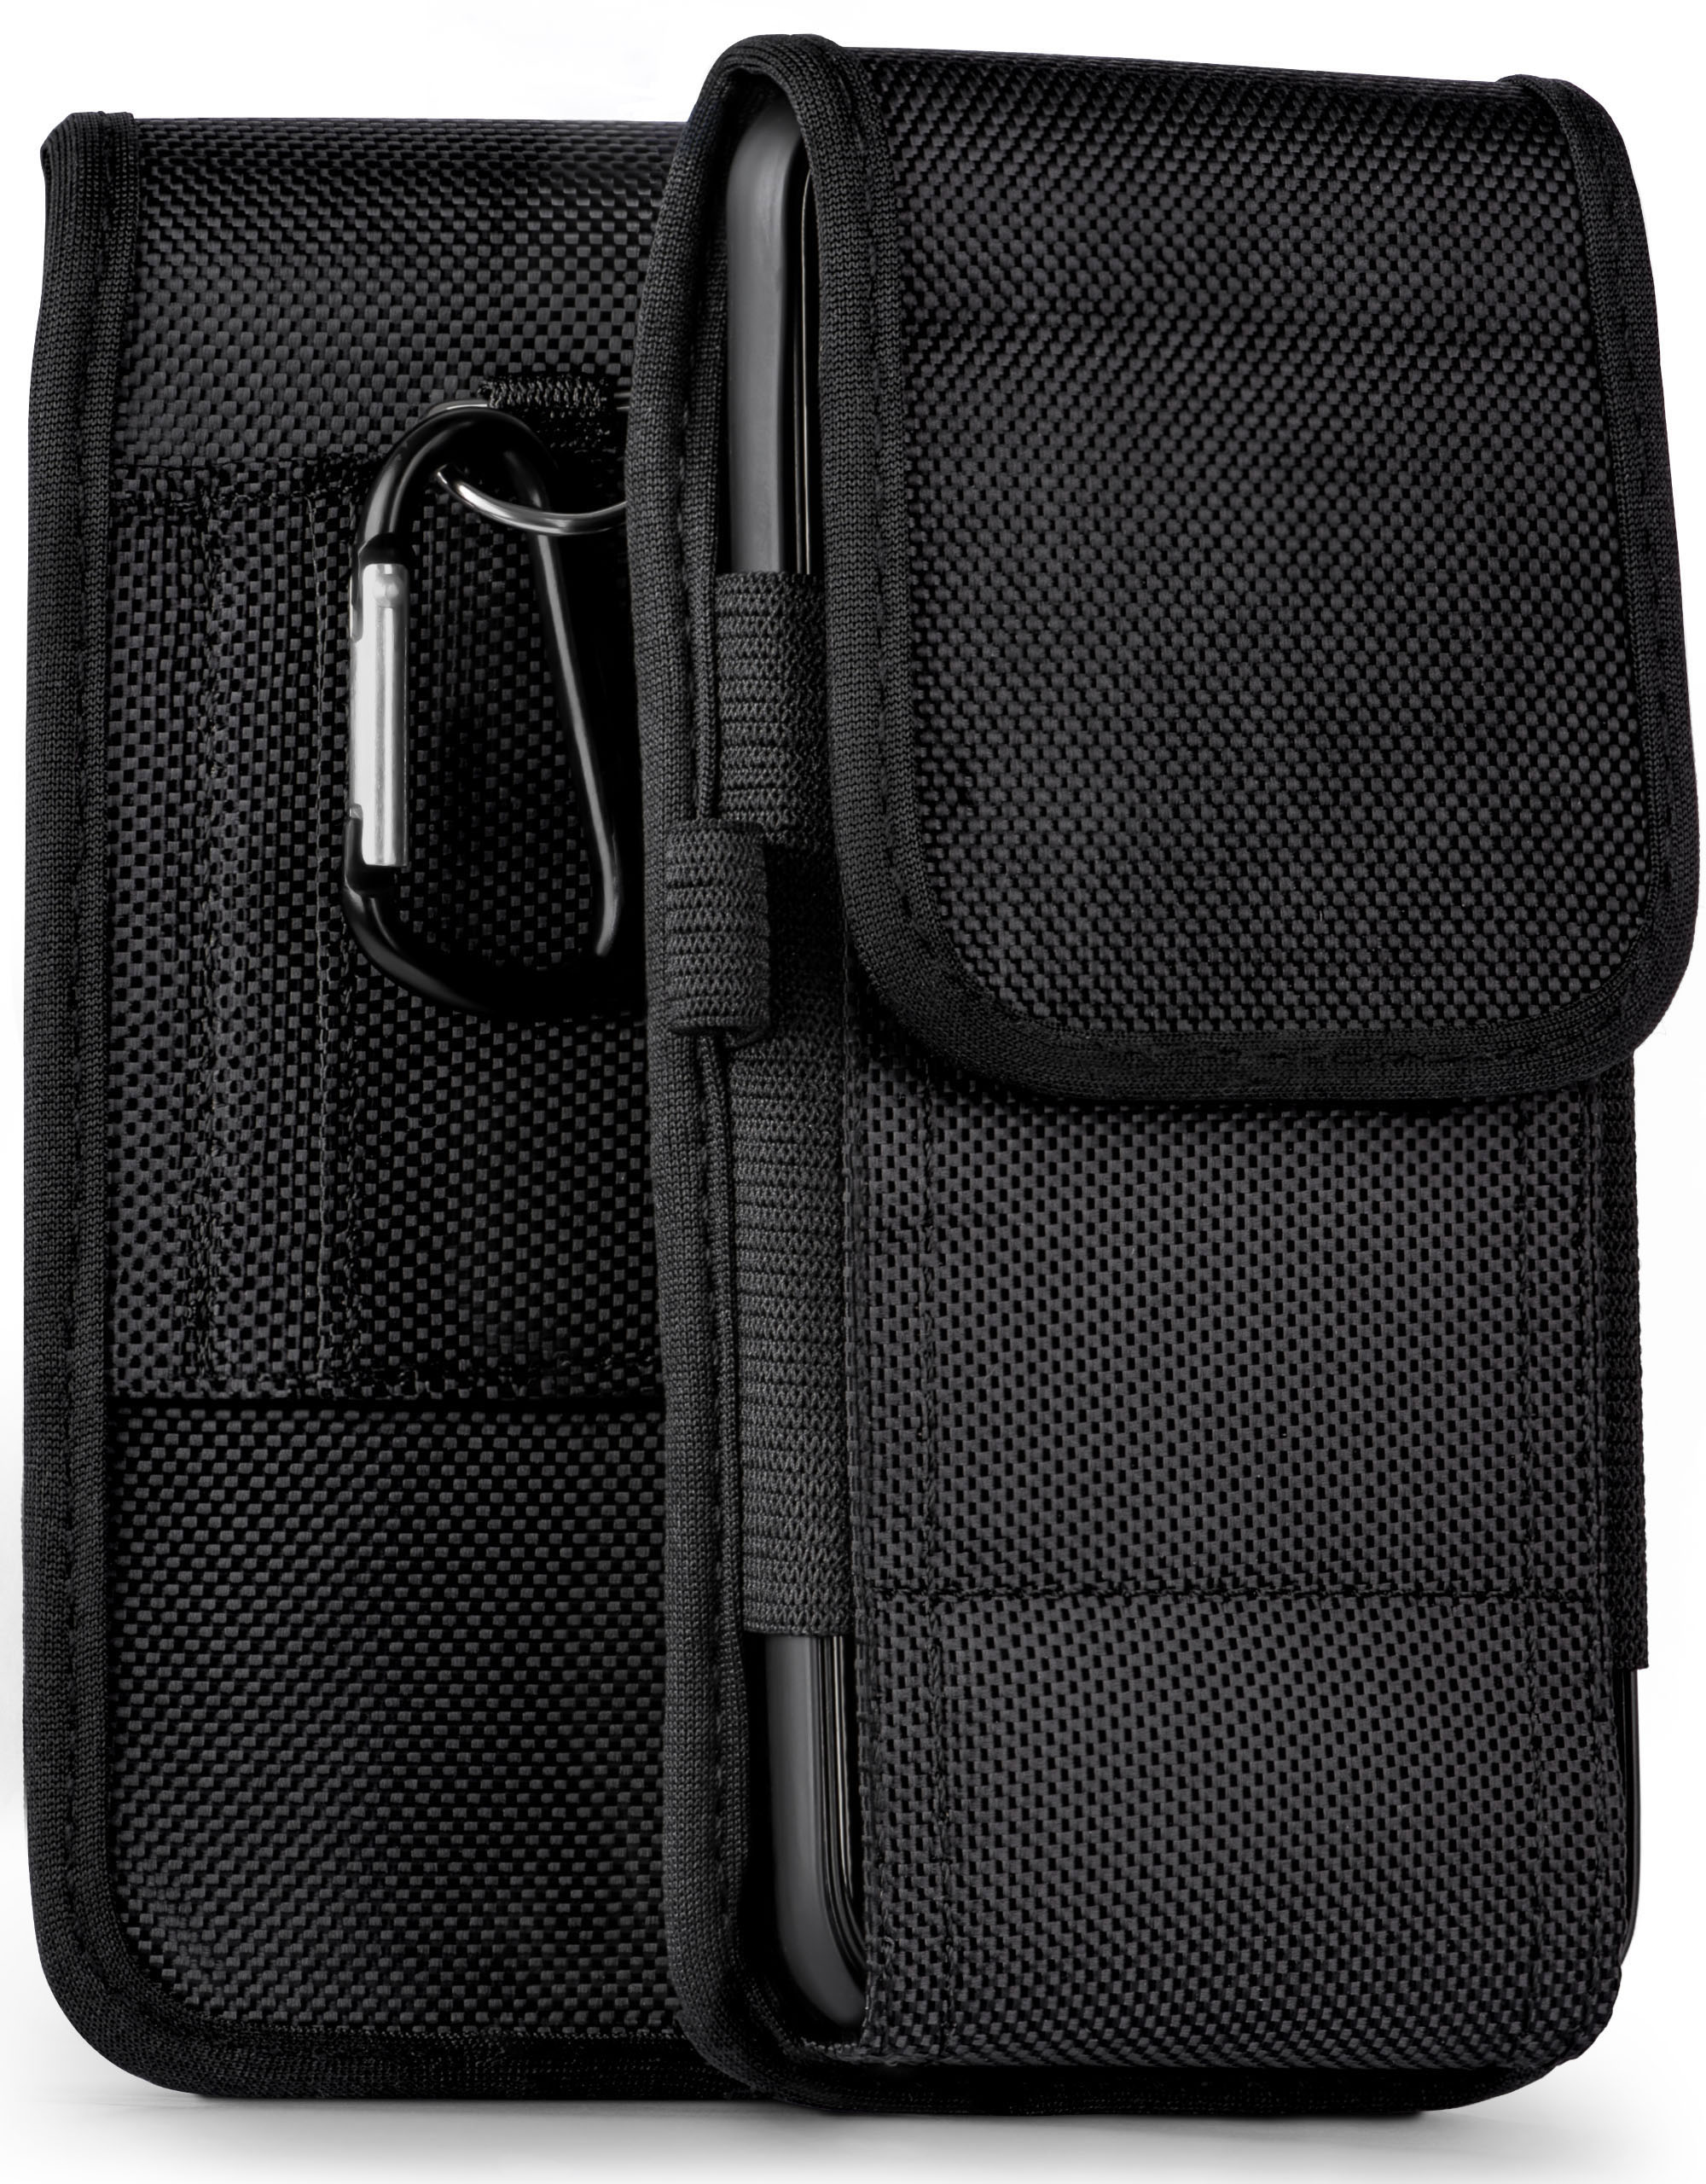 One Trail Agility MOEX M9, Case, Holster, HTC,